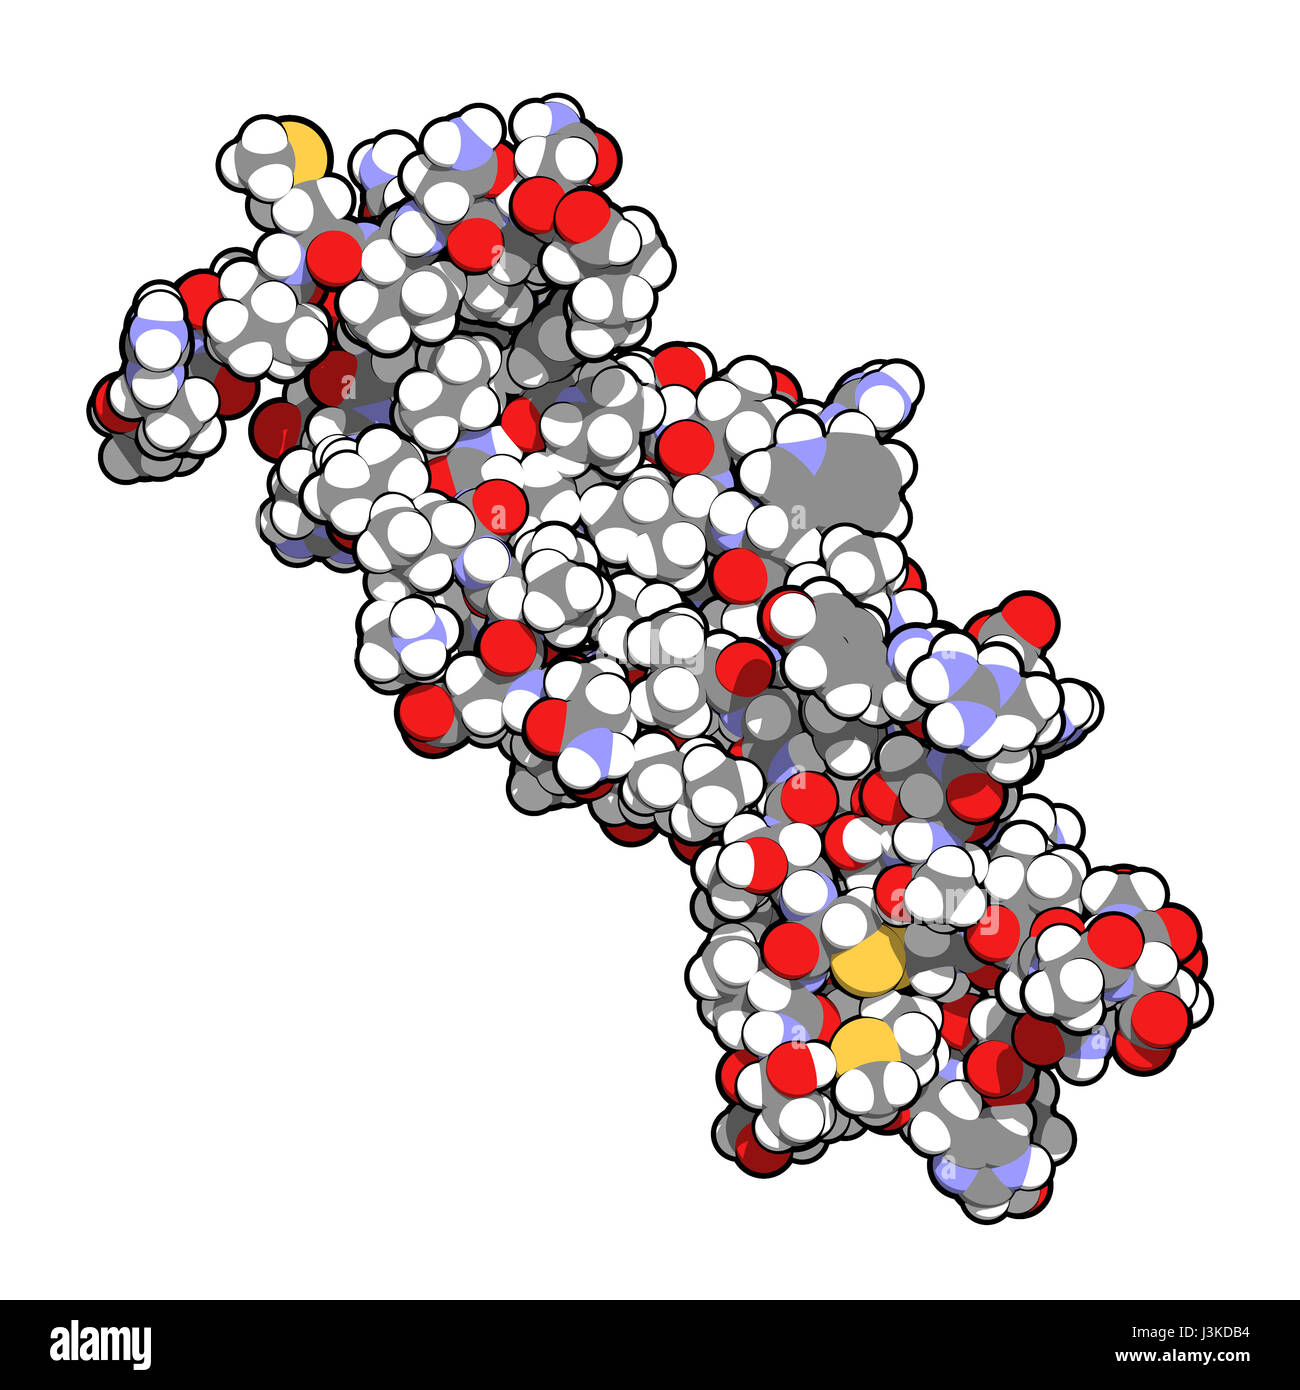 Interleukin 17 (IL-17A, IL-17) cytokine molecule. IL-17 antibodies are evaluated for the treatment of psoriasis and other diseases. Atoms shown as col Stock Photo